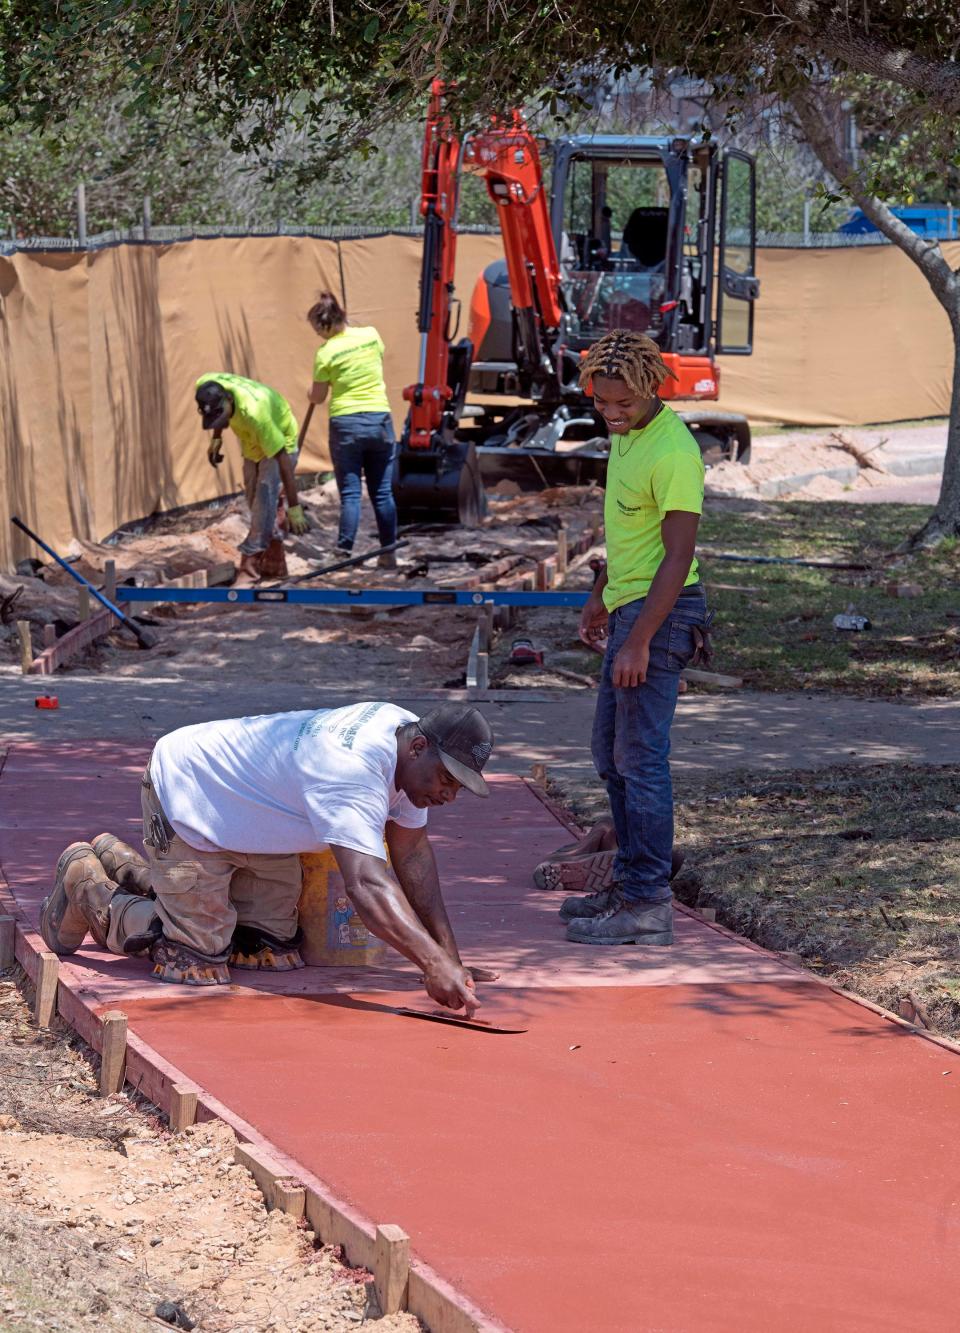 Nearly two years after Hurricane Sally ravaged Plaza De Luna, contract workers from Emerald Coast Contractors, Inc. are working to repair the tropical cyclone's damage to the downtown Pensacola park on April 28, 2022. 